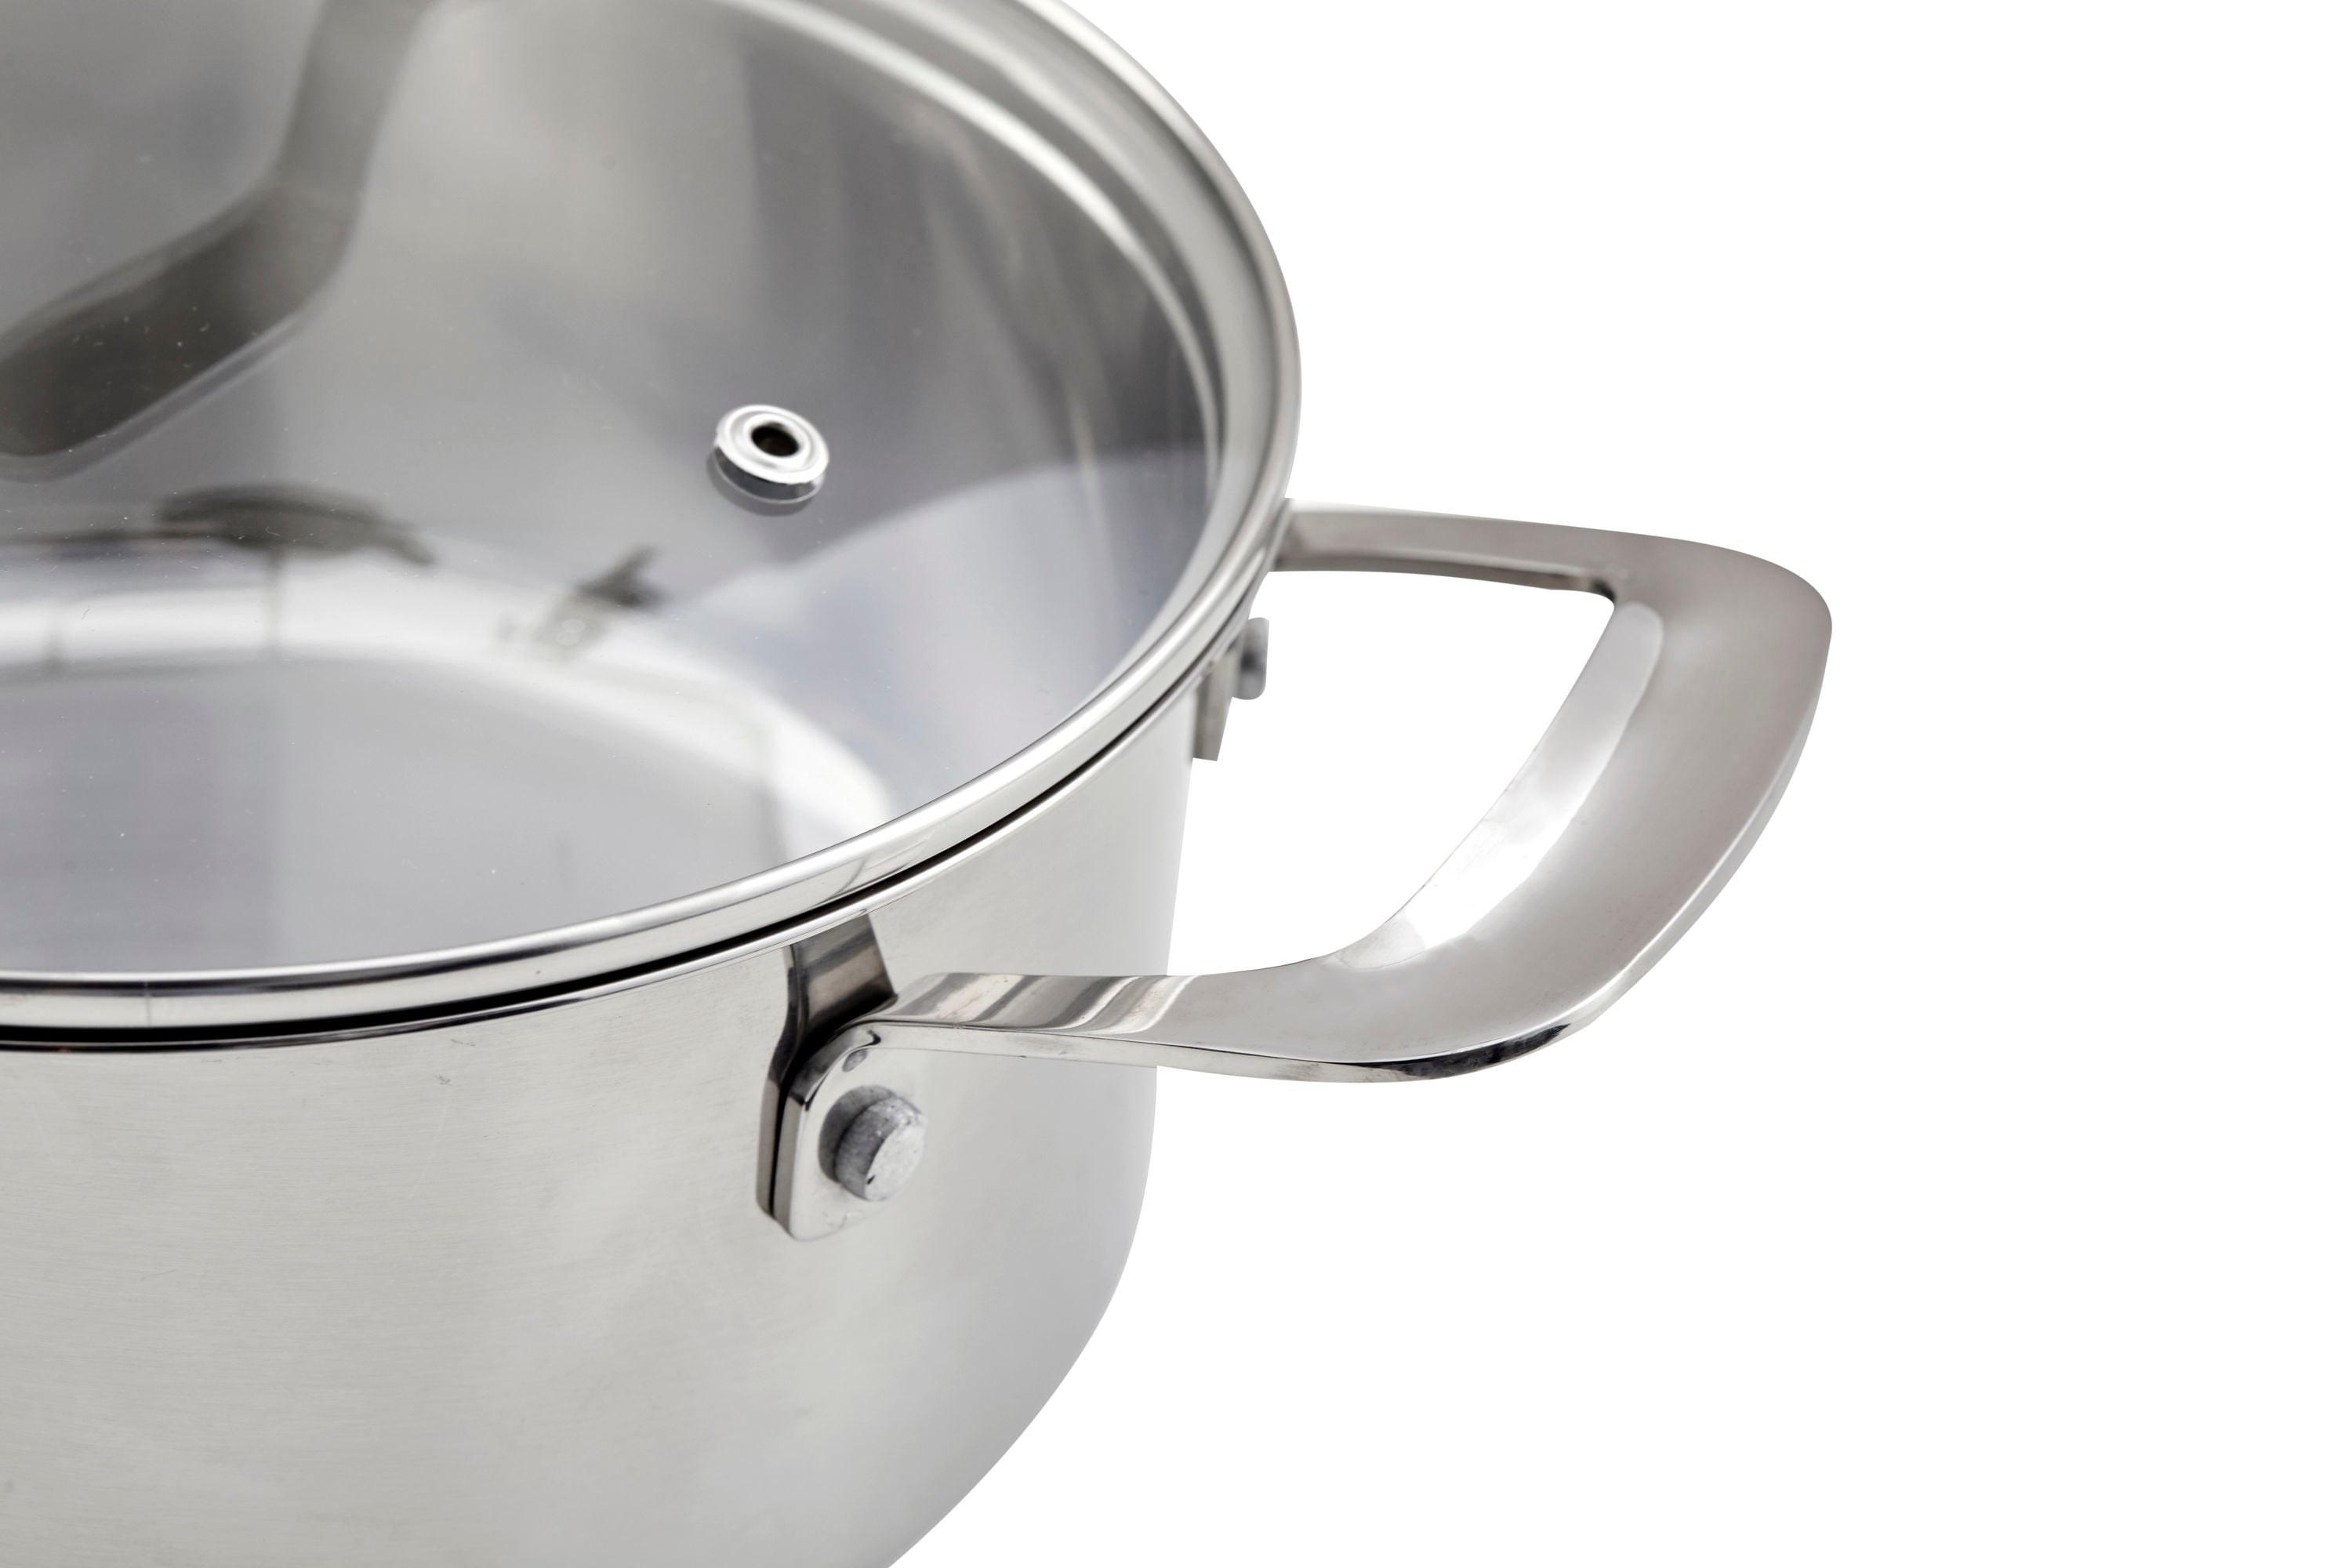 Davyline Cookware 3-Layer Base 3-Quart Stainless Steel Steamer Pot Basket(s)  Included in the Cooking Pots department at